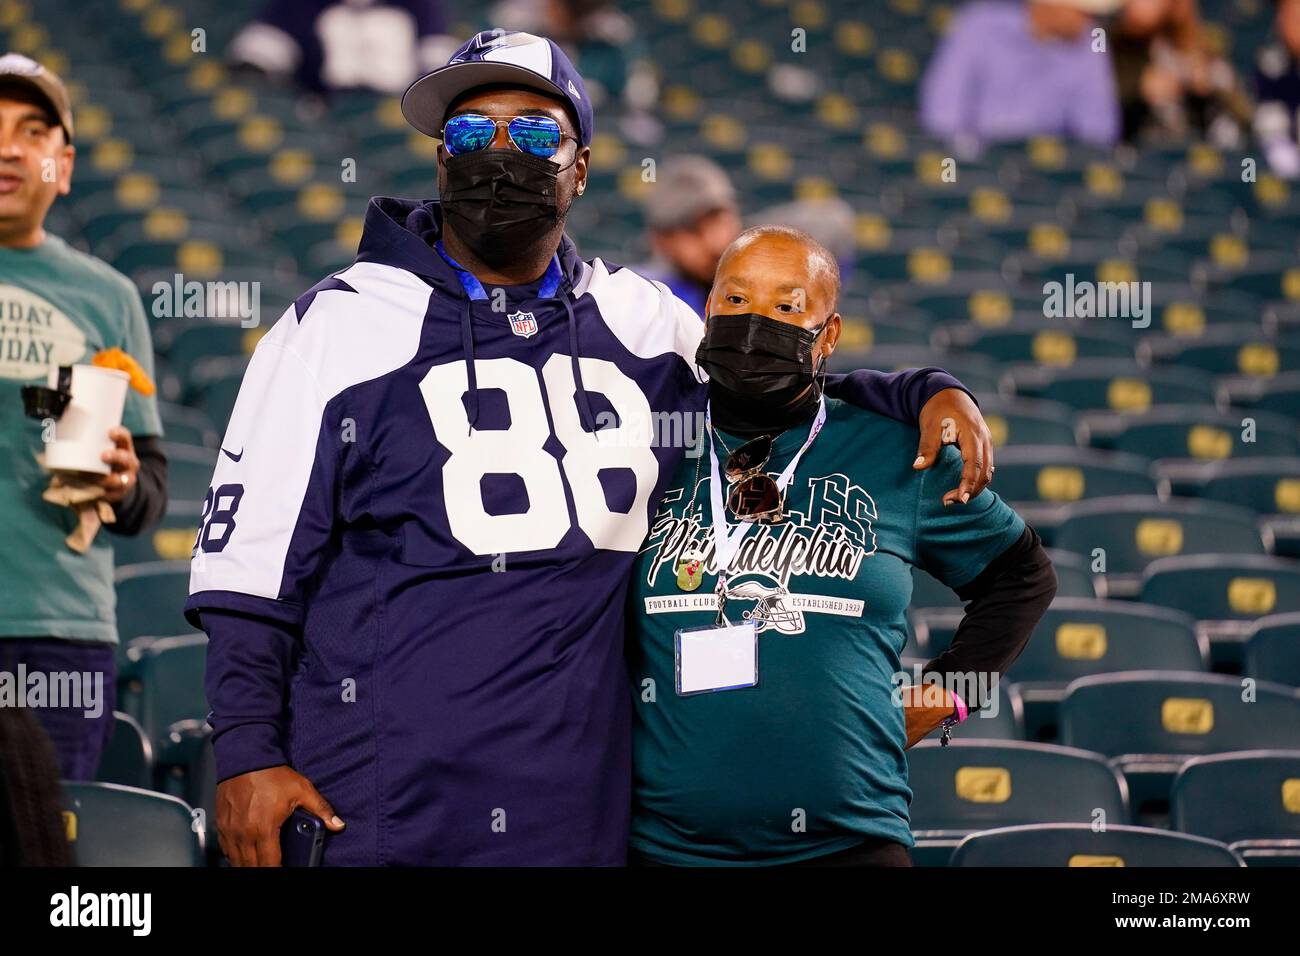 A Dallas Cowboys fan and a Philadelphia Eagles fan pose for a photo before  an NFL football game between the Eagles and Cowboys on Sunday, Oct. 16, 2022,  in Philadelphia. (AP Photo/Matt